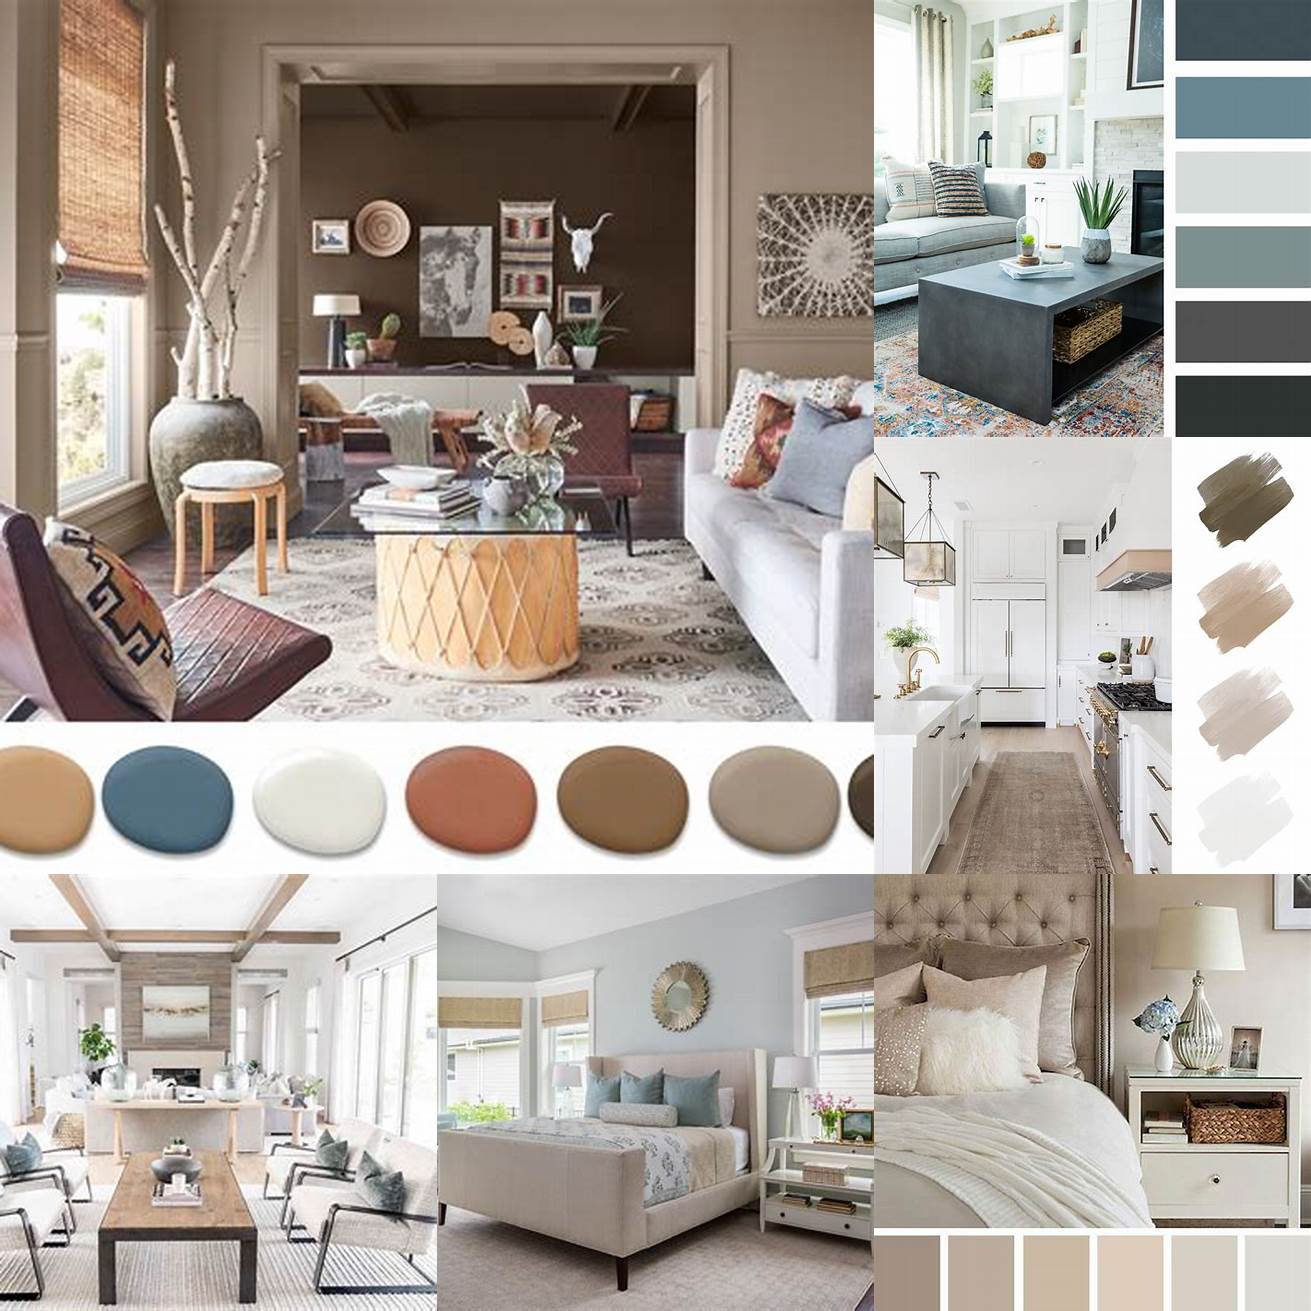 Choose a neutral color palette for your walls bedding and furniture Whites greys and beige are all good choices